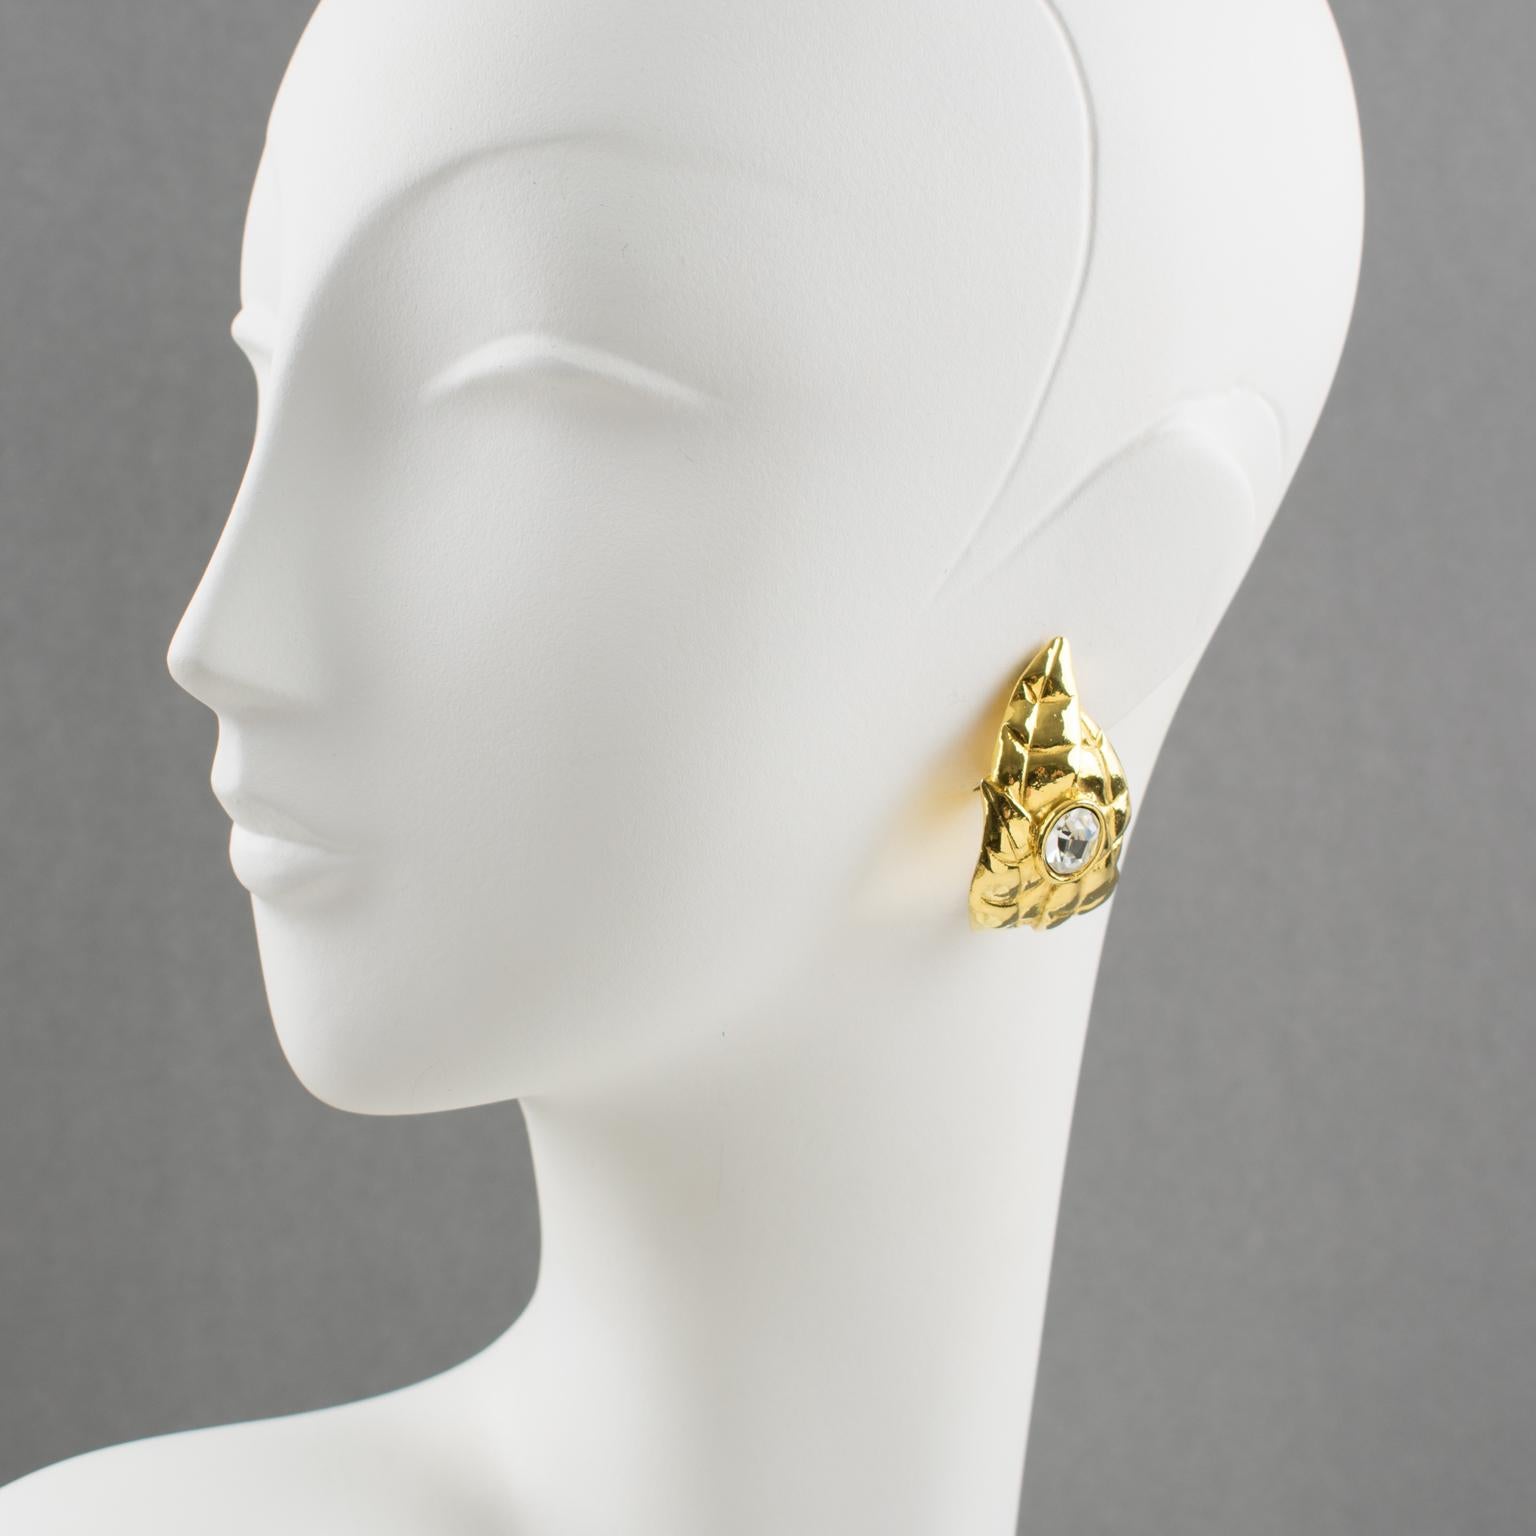 Stunning clip-on earrings by Ines de la Fressange Paris. Hoop shape, with gilt metal all carved and textured featuring oak leaves compliment with a huge clear crystal rhinestone. Signed underside with Ines de la Fressange gilt logo tag: 